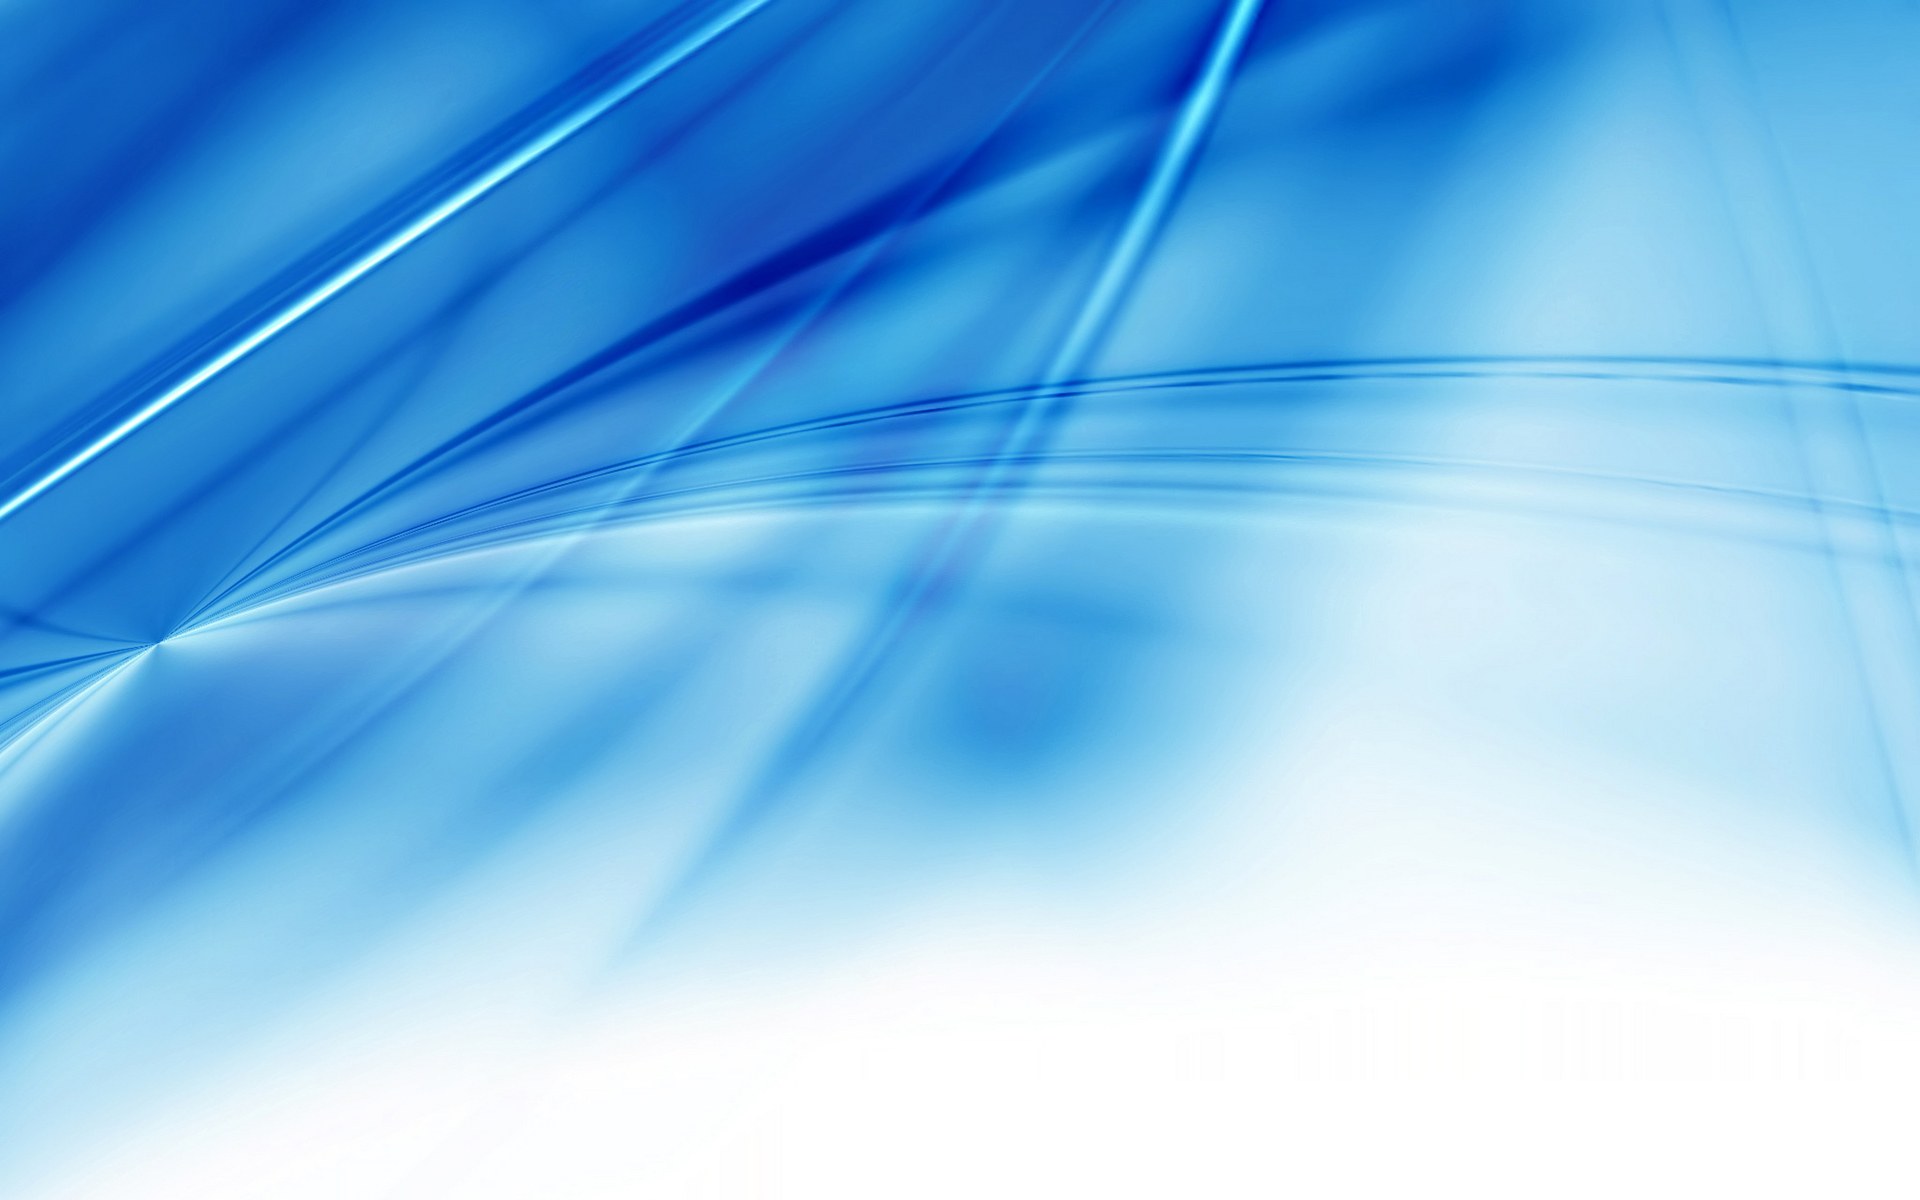 Blue Abstract Background 3158 Hd Wallpapers in Abstract   Imagescicom 1920x1200